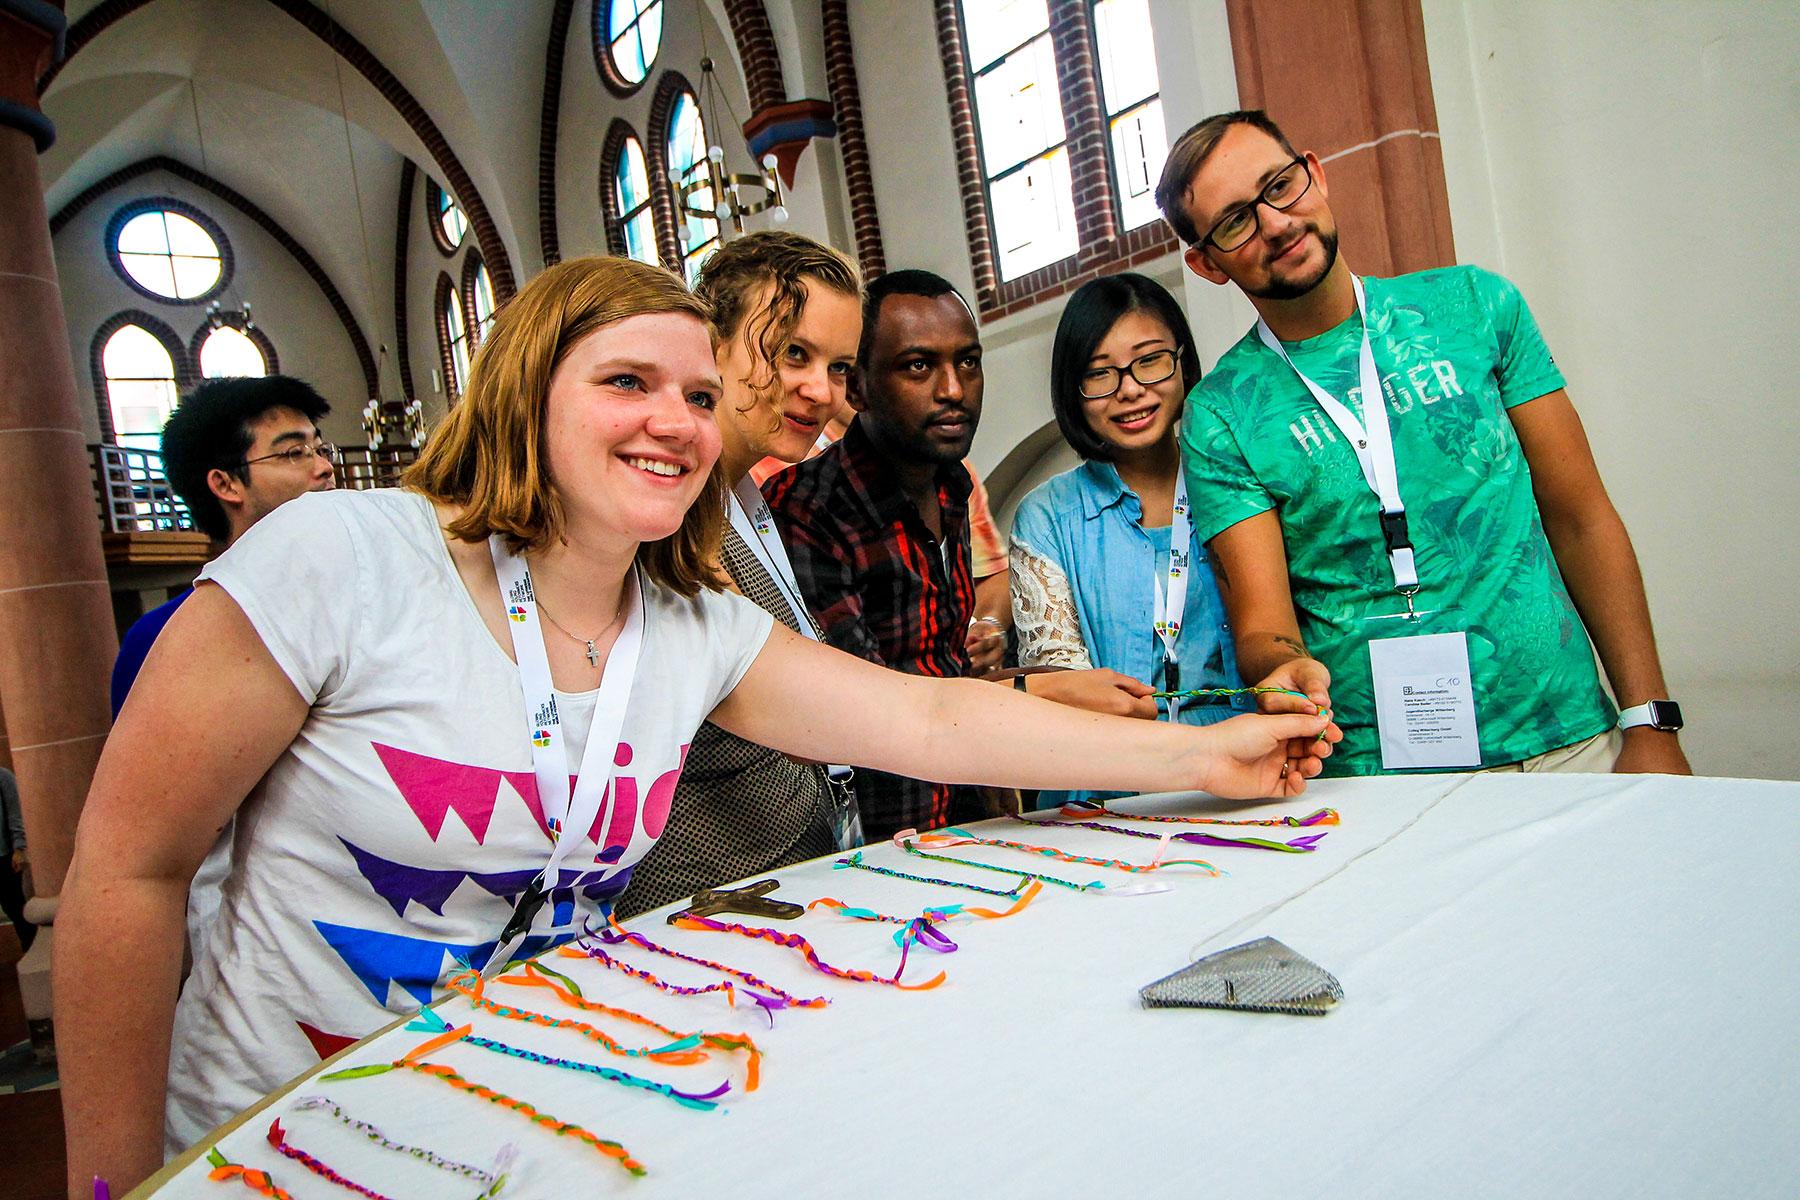 LWF youth have significantly advanced the communionâs advocacy priorities including climate justice and peace building. Photo: LWF/Johanan Celine P. Valeriano